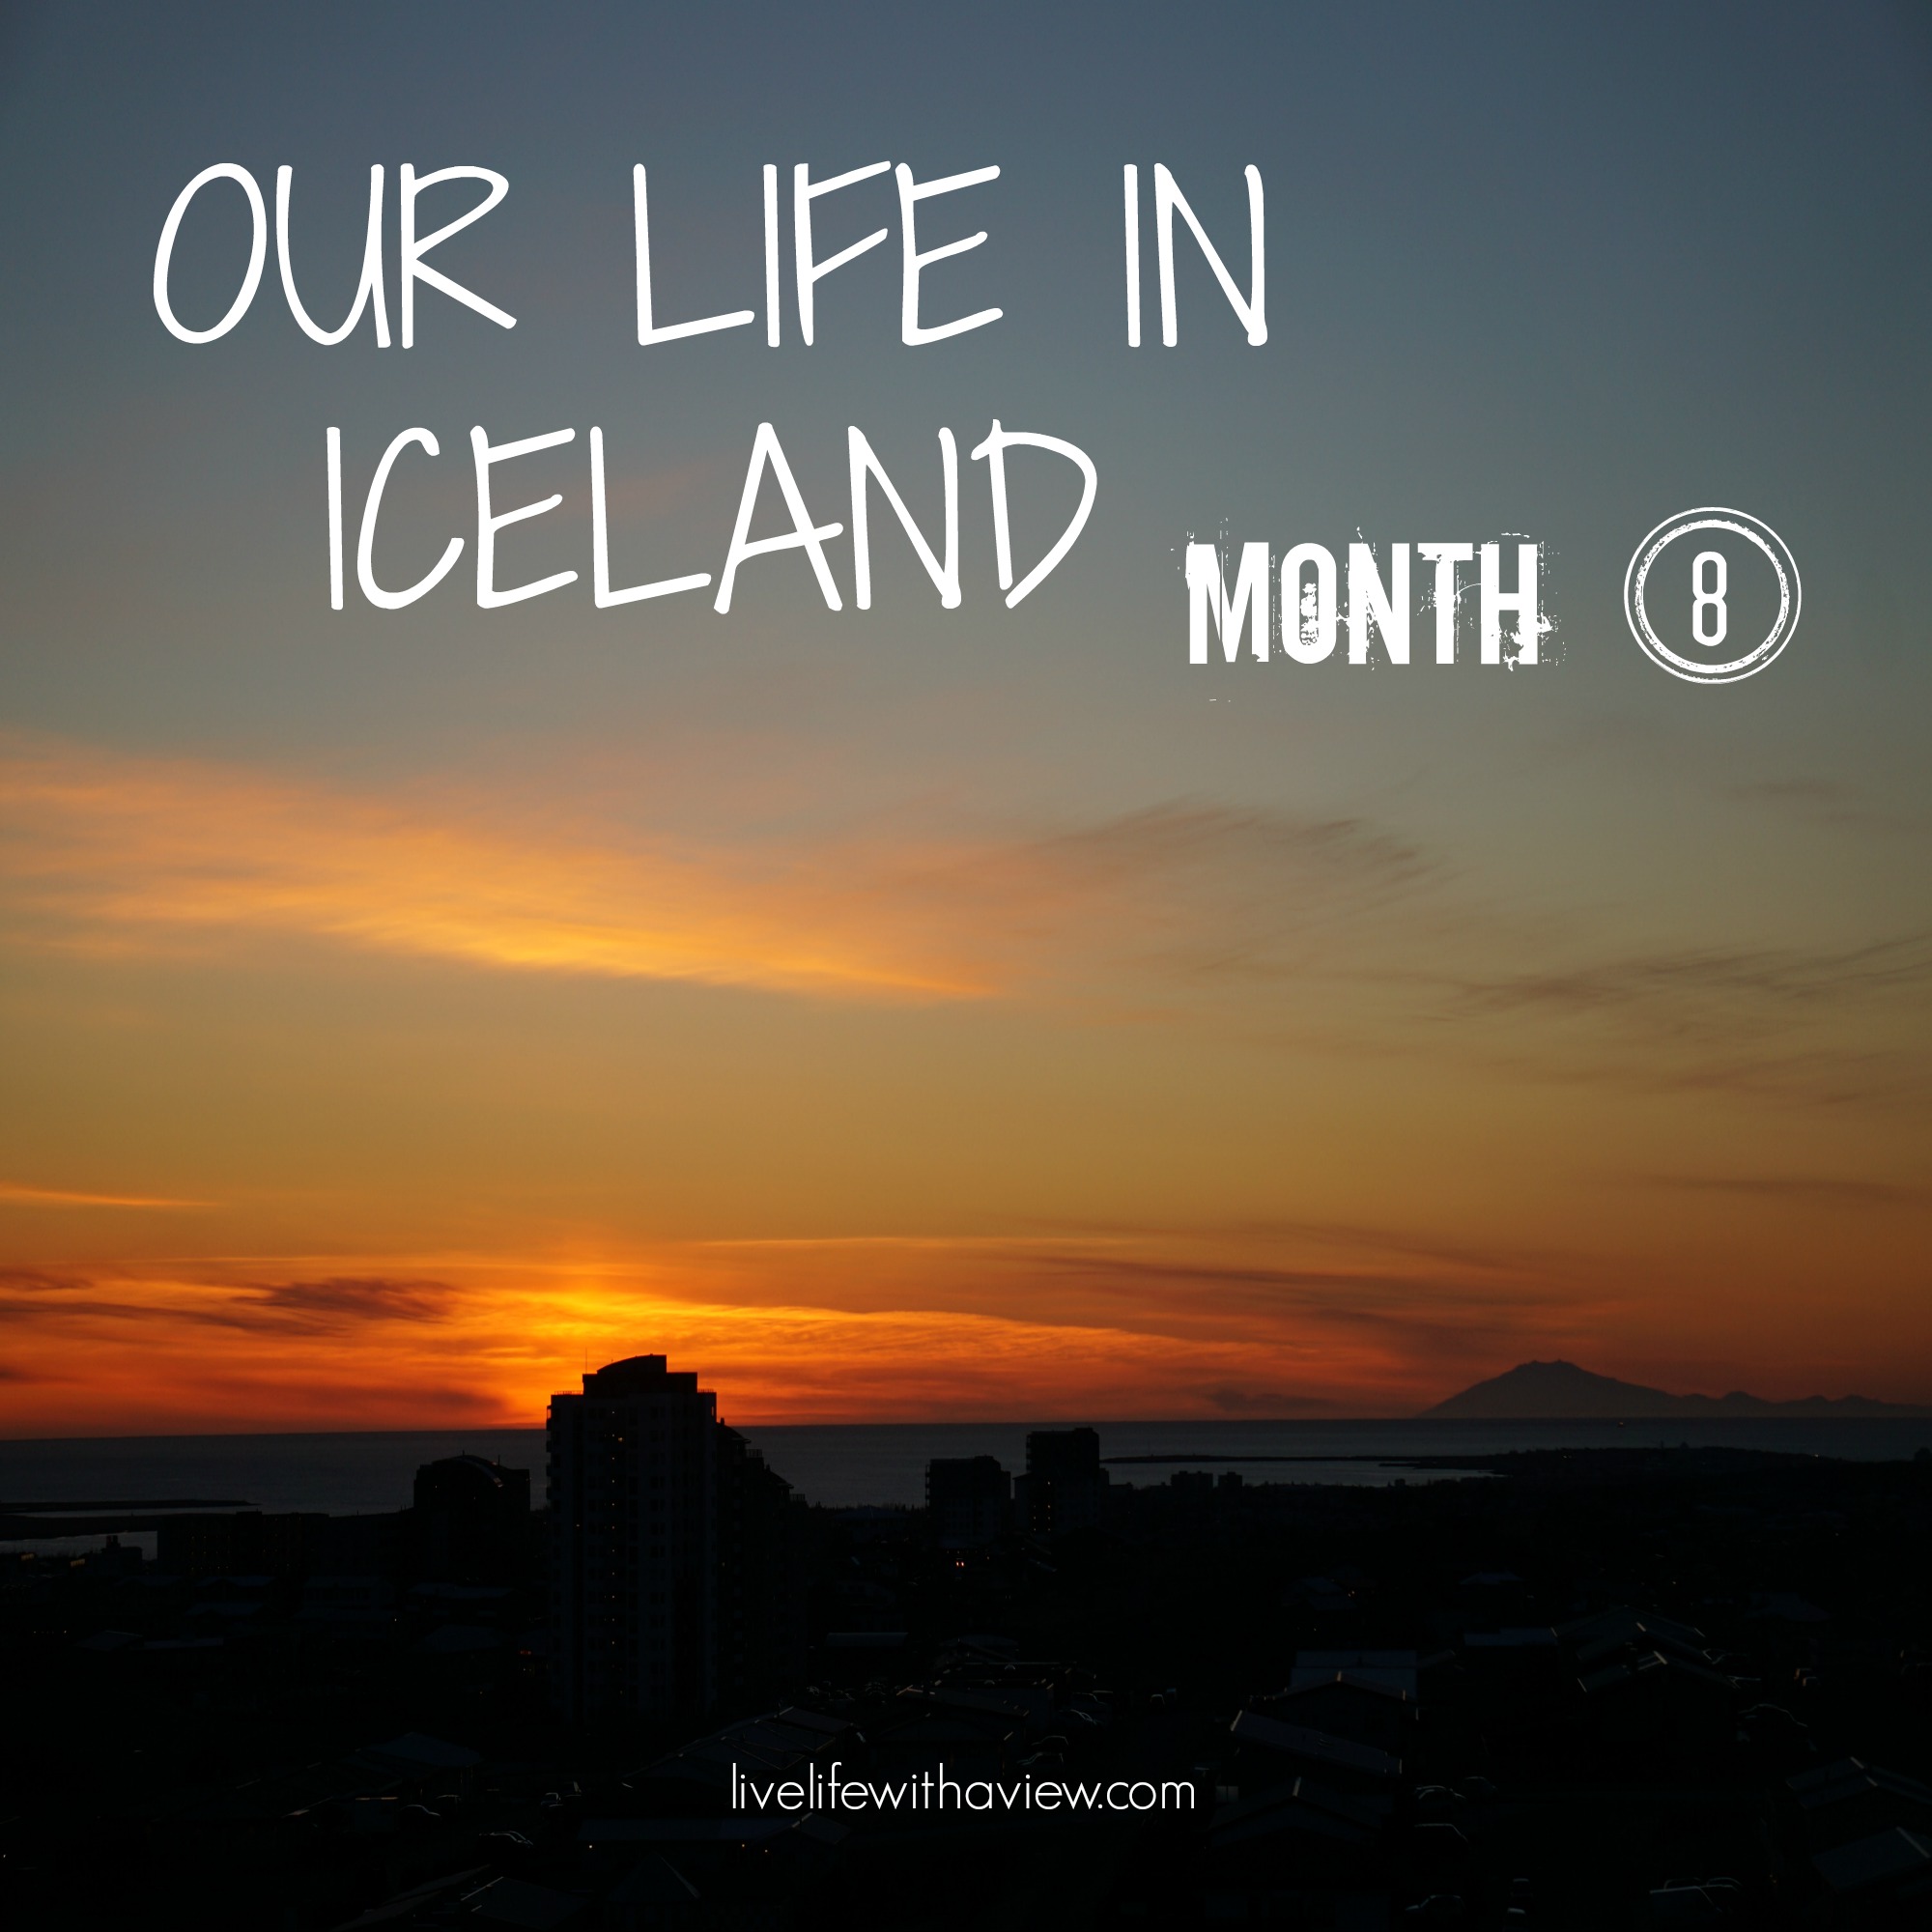 Our life in Iceland - Month 8